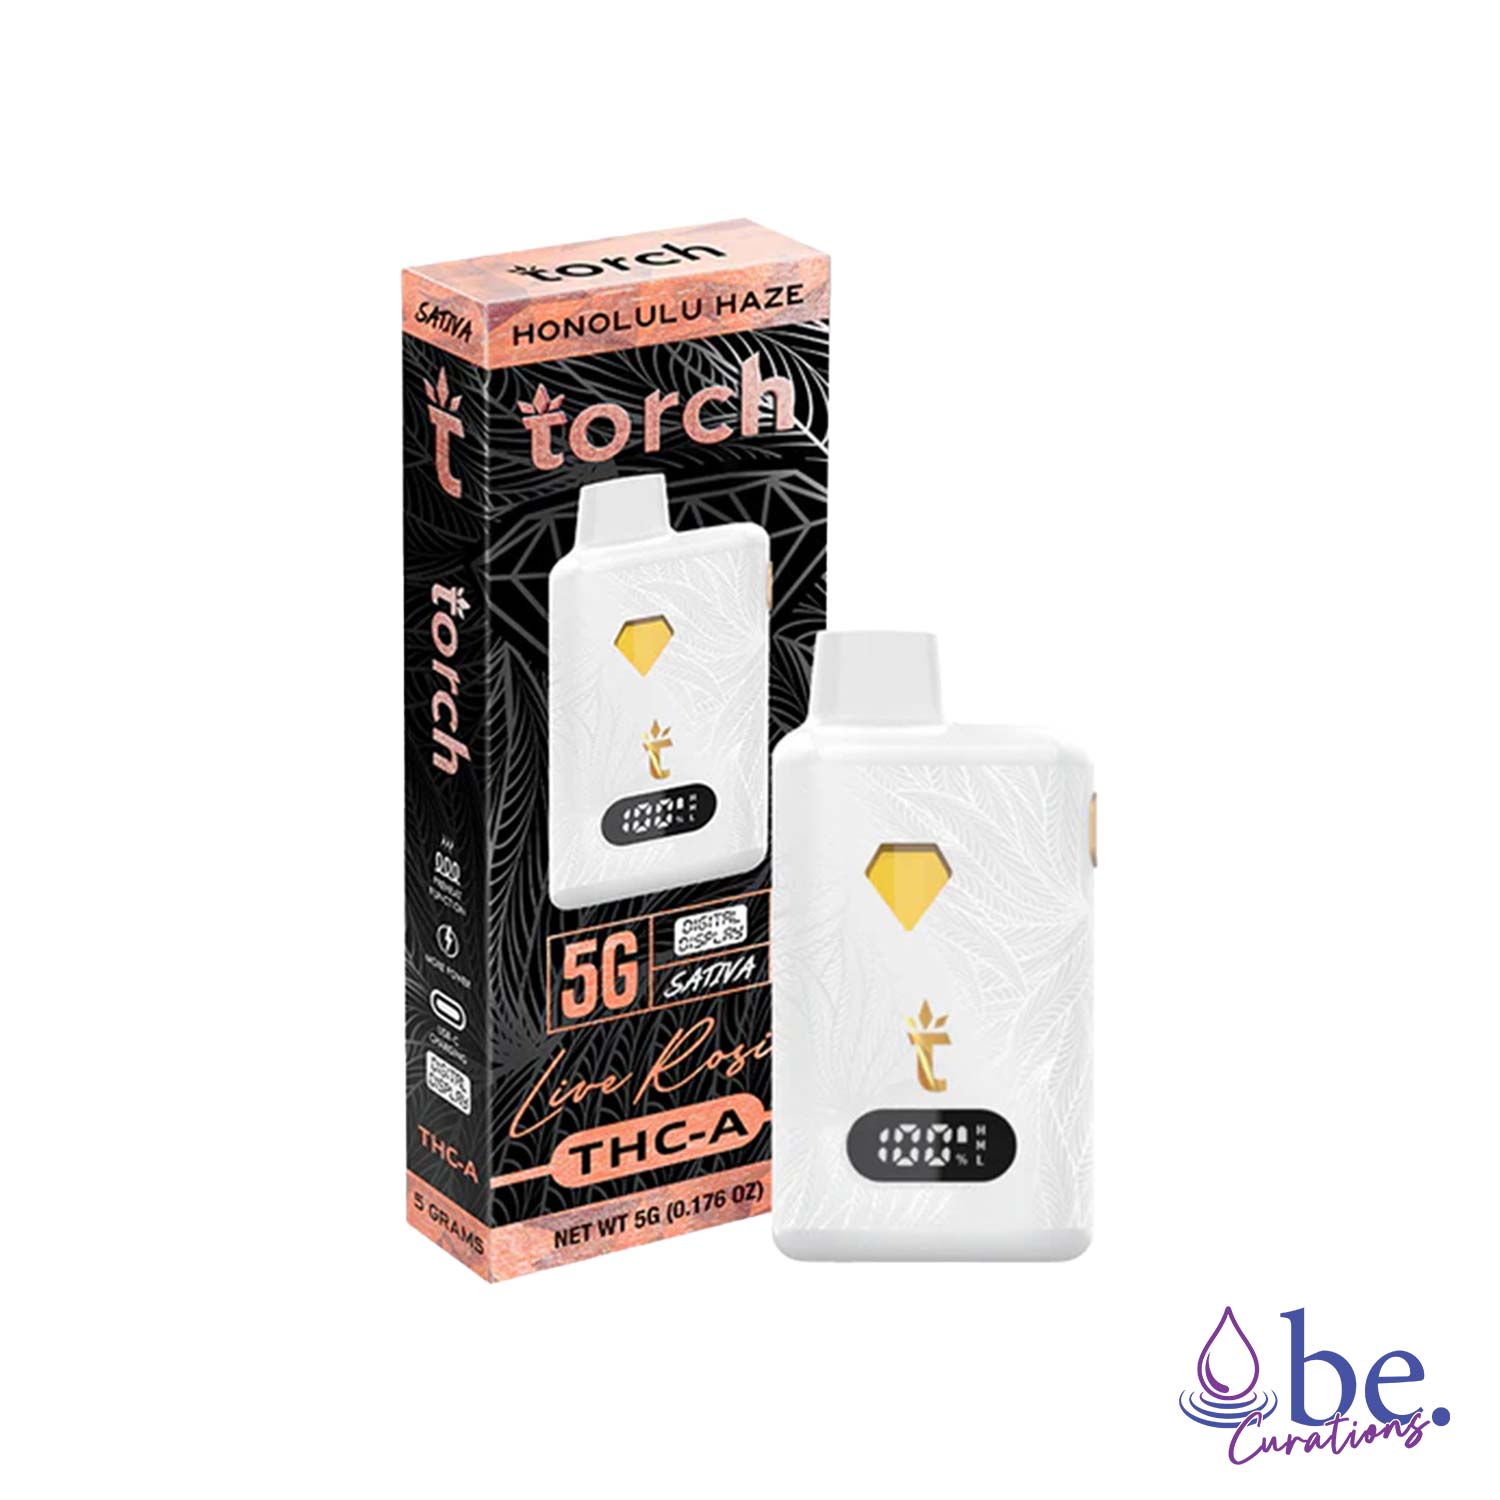 Torch Delta THC-A + Live Rosin Disposable Vape Device 5G - Honululu Haze (Sativa) | Pineapple and mango with earthy undertones, giving off a floral and tropical aroma. | be.Curations